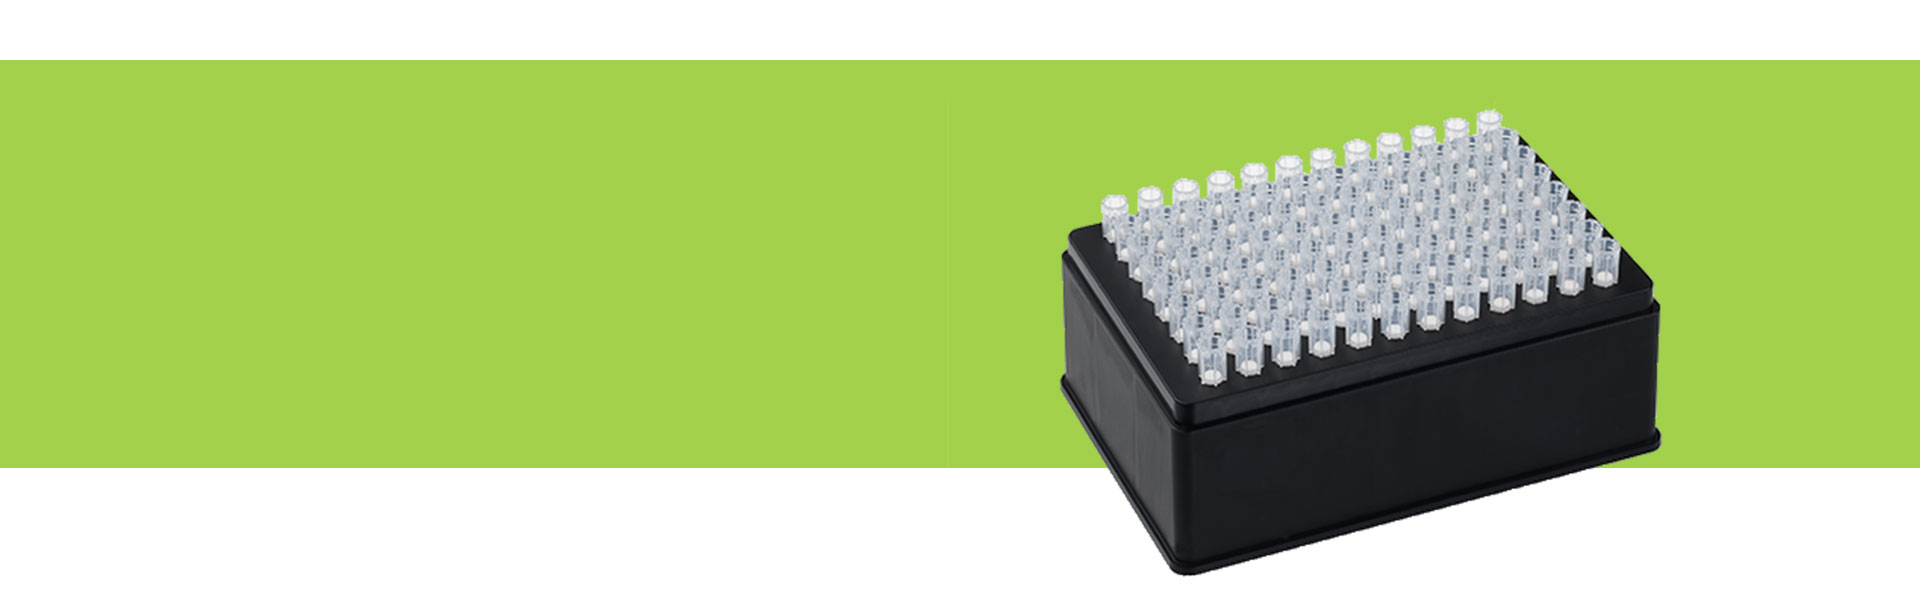 MDHC Pipette Tips